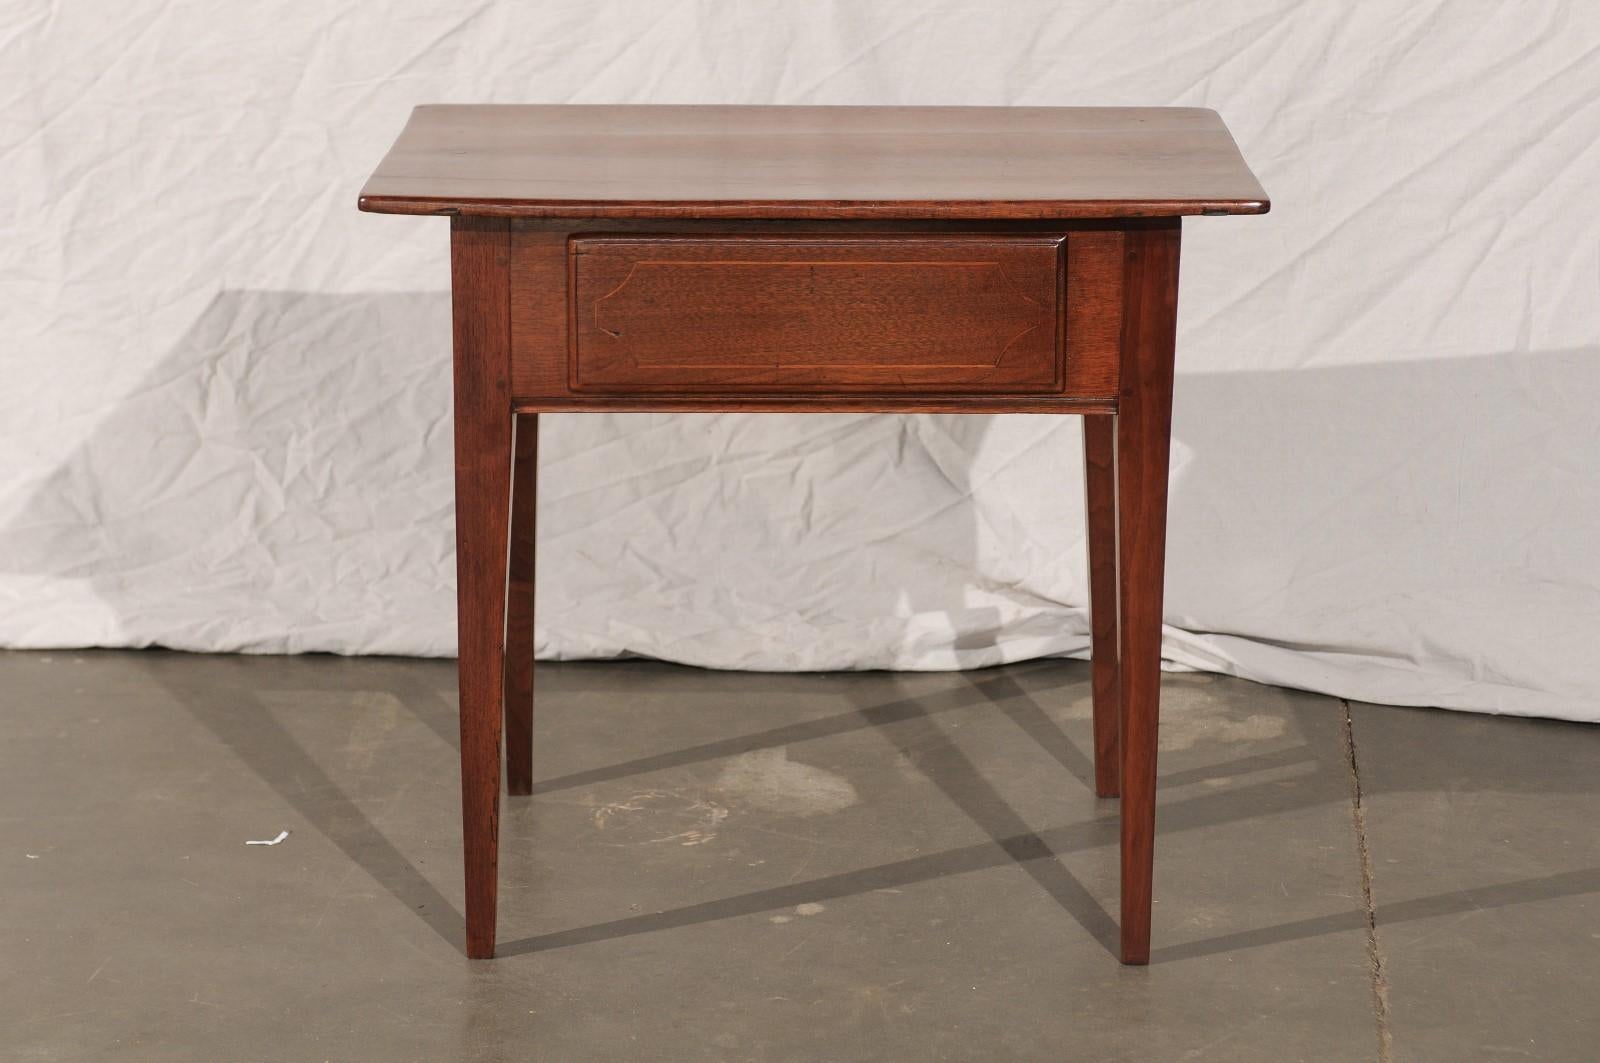 Wood 19th Century American Table with String Inlay, One Drawer